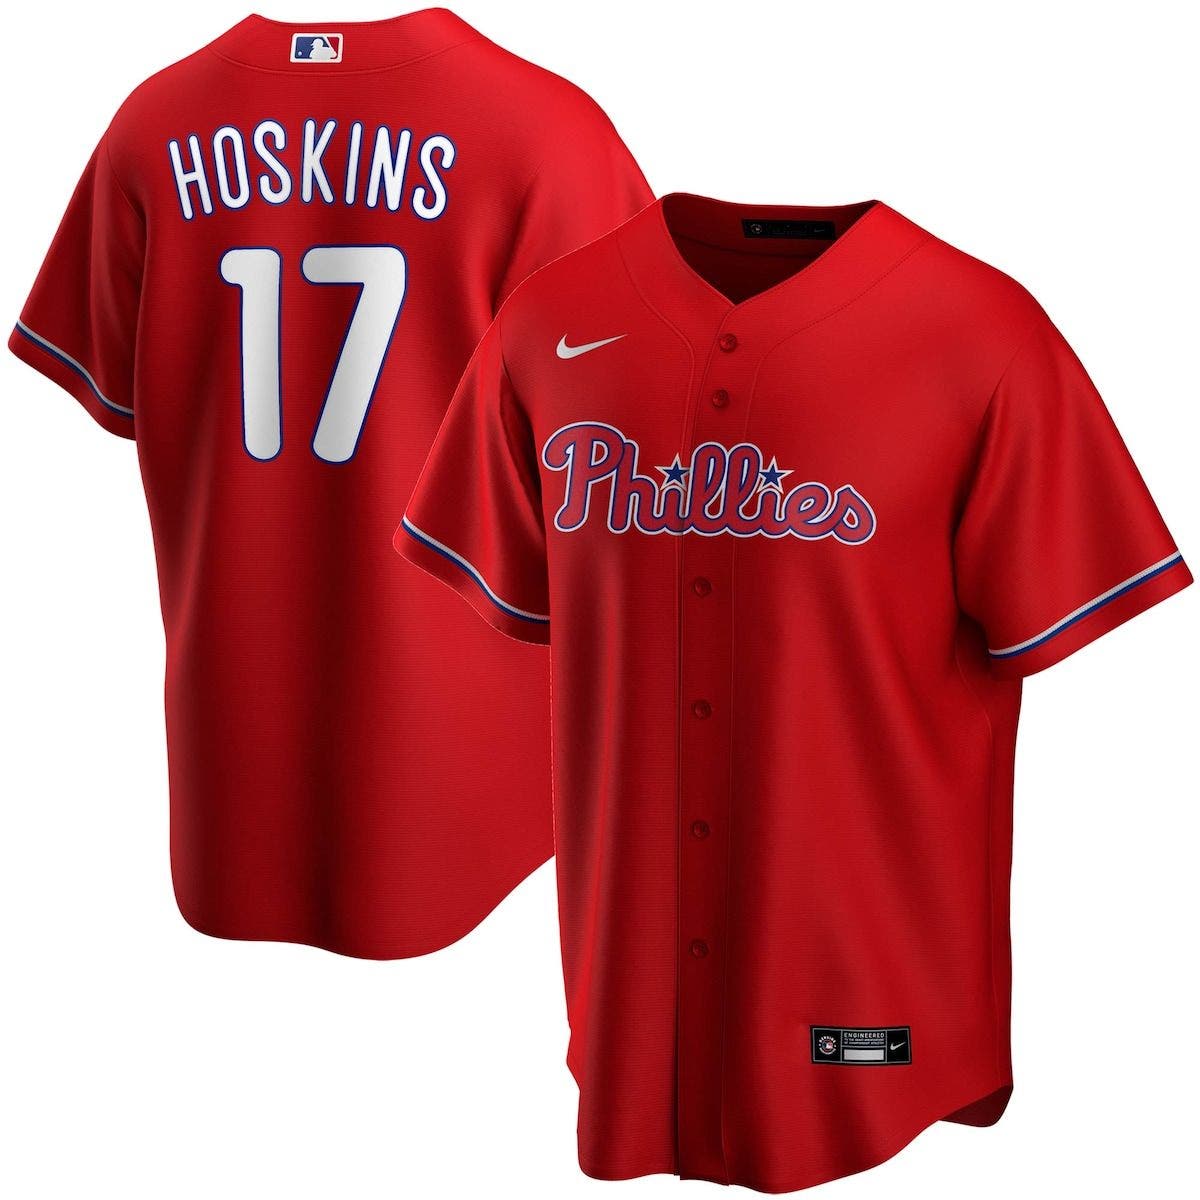 Outerstuff Rhys Hoskins Philadelphia Phillies Blue Youth Name and Number Jersey T-Shirt 